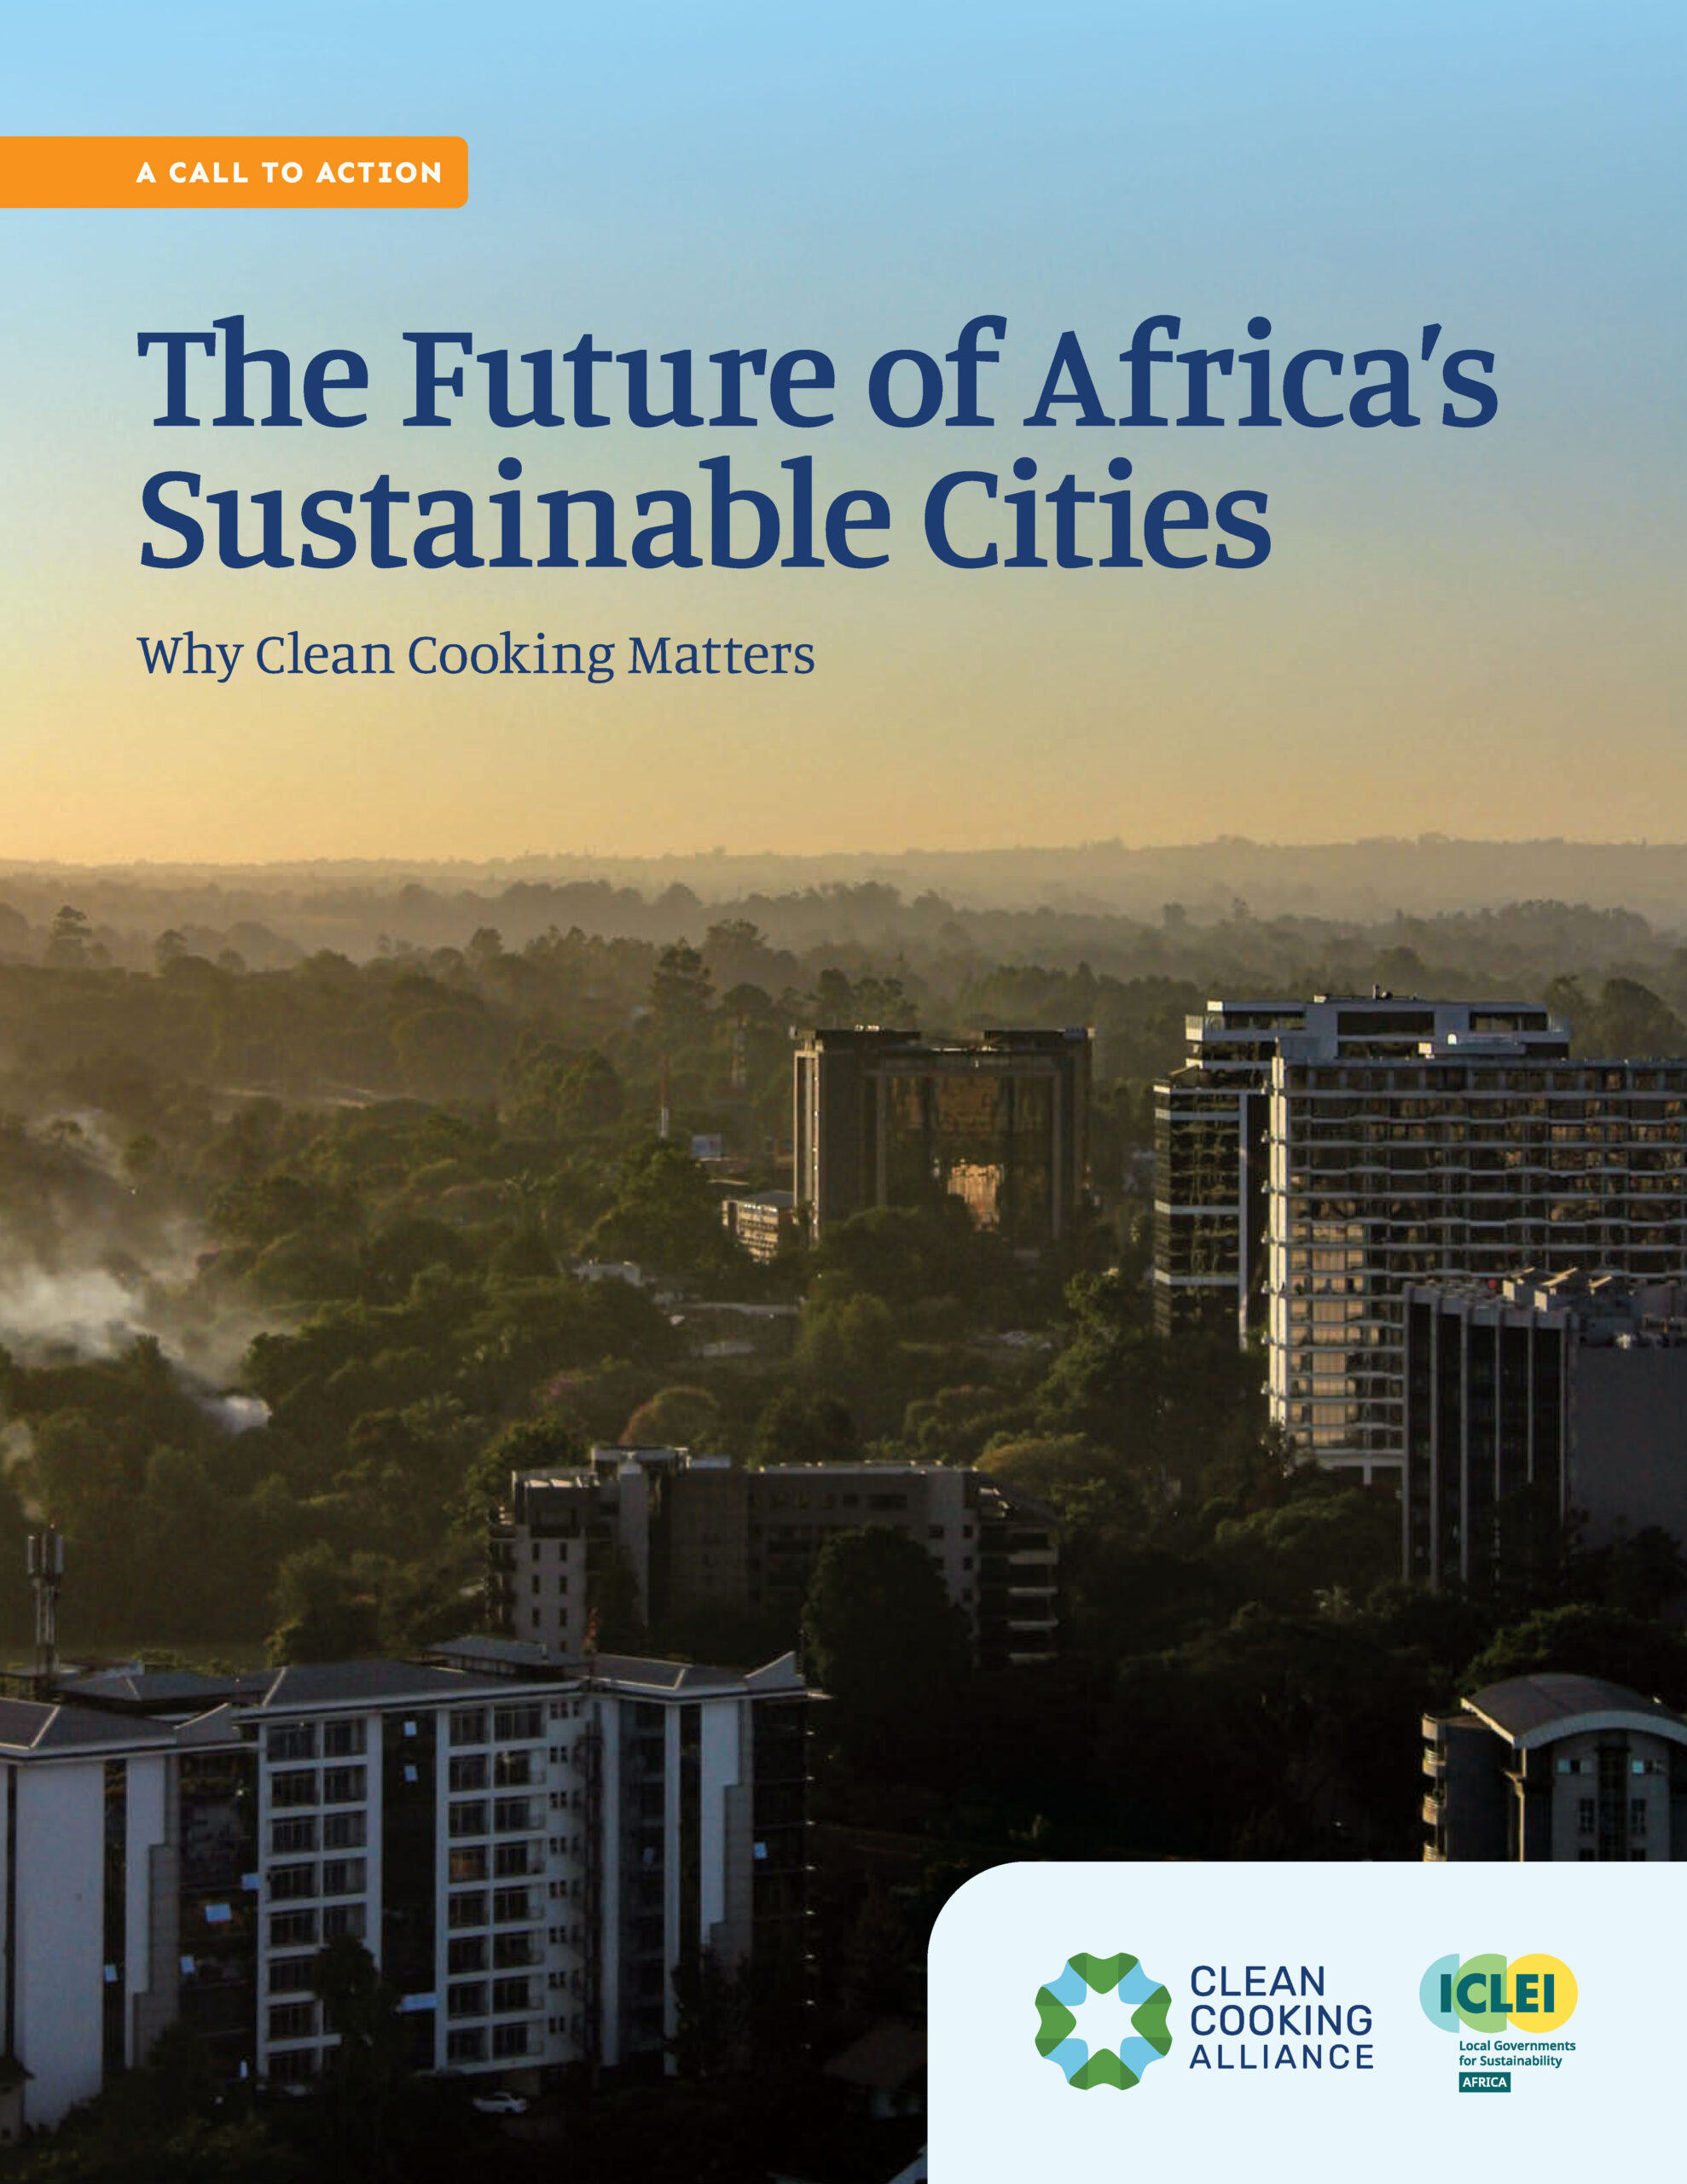 The Future of Africa’s Sustainable Cities: Why Clean Cooking Matters